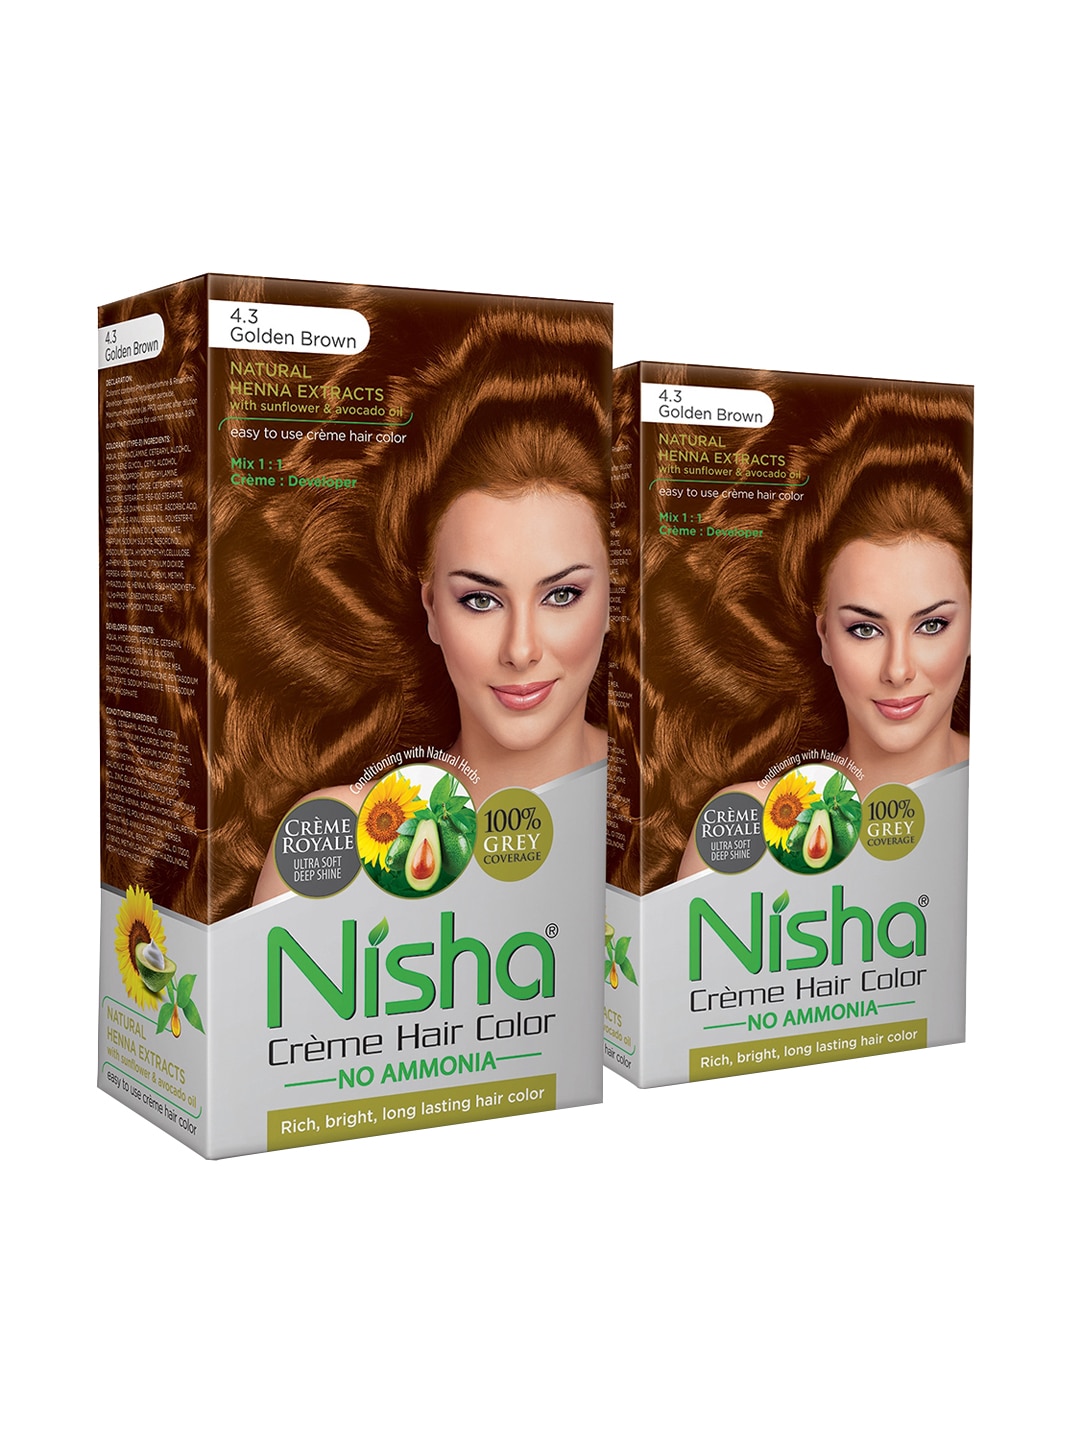 Nisha Unisex Pack of 2 Creme Hair Color 120gm each- Golden Brown Price in  India, Full Specifications & Offers 